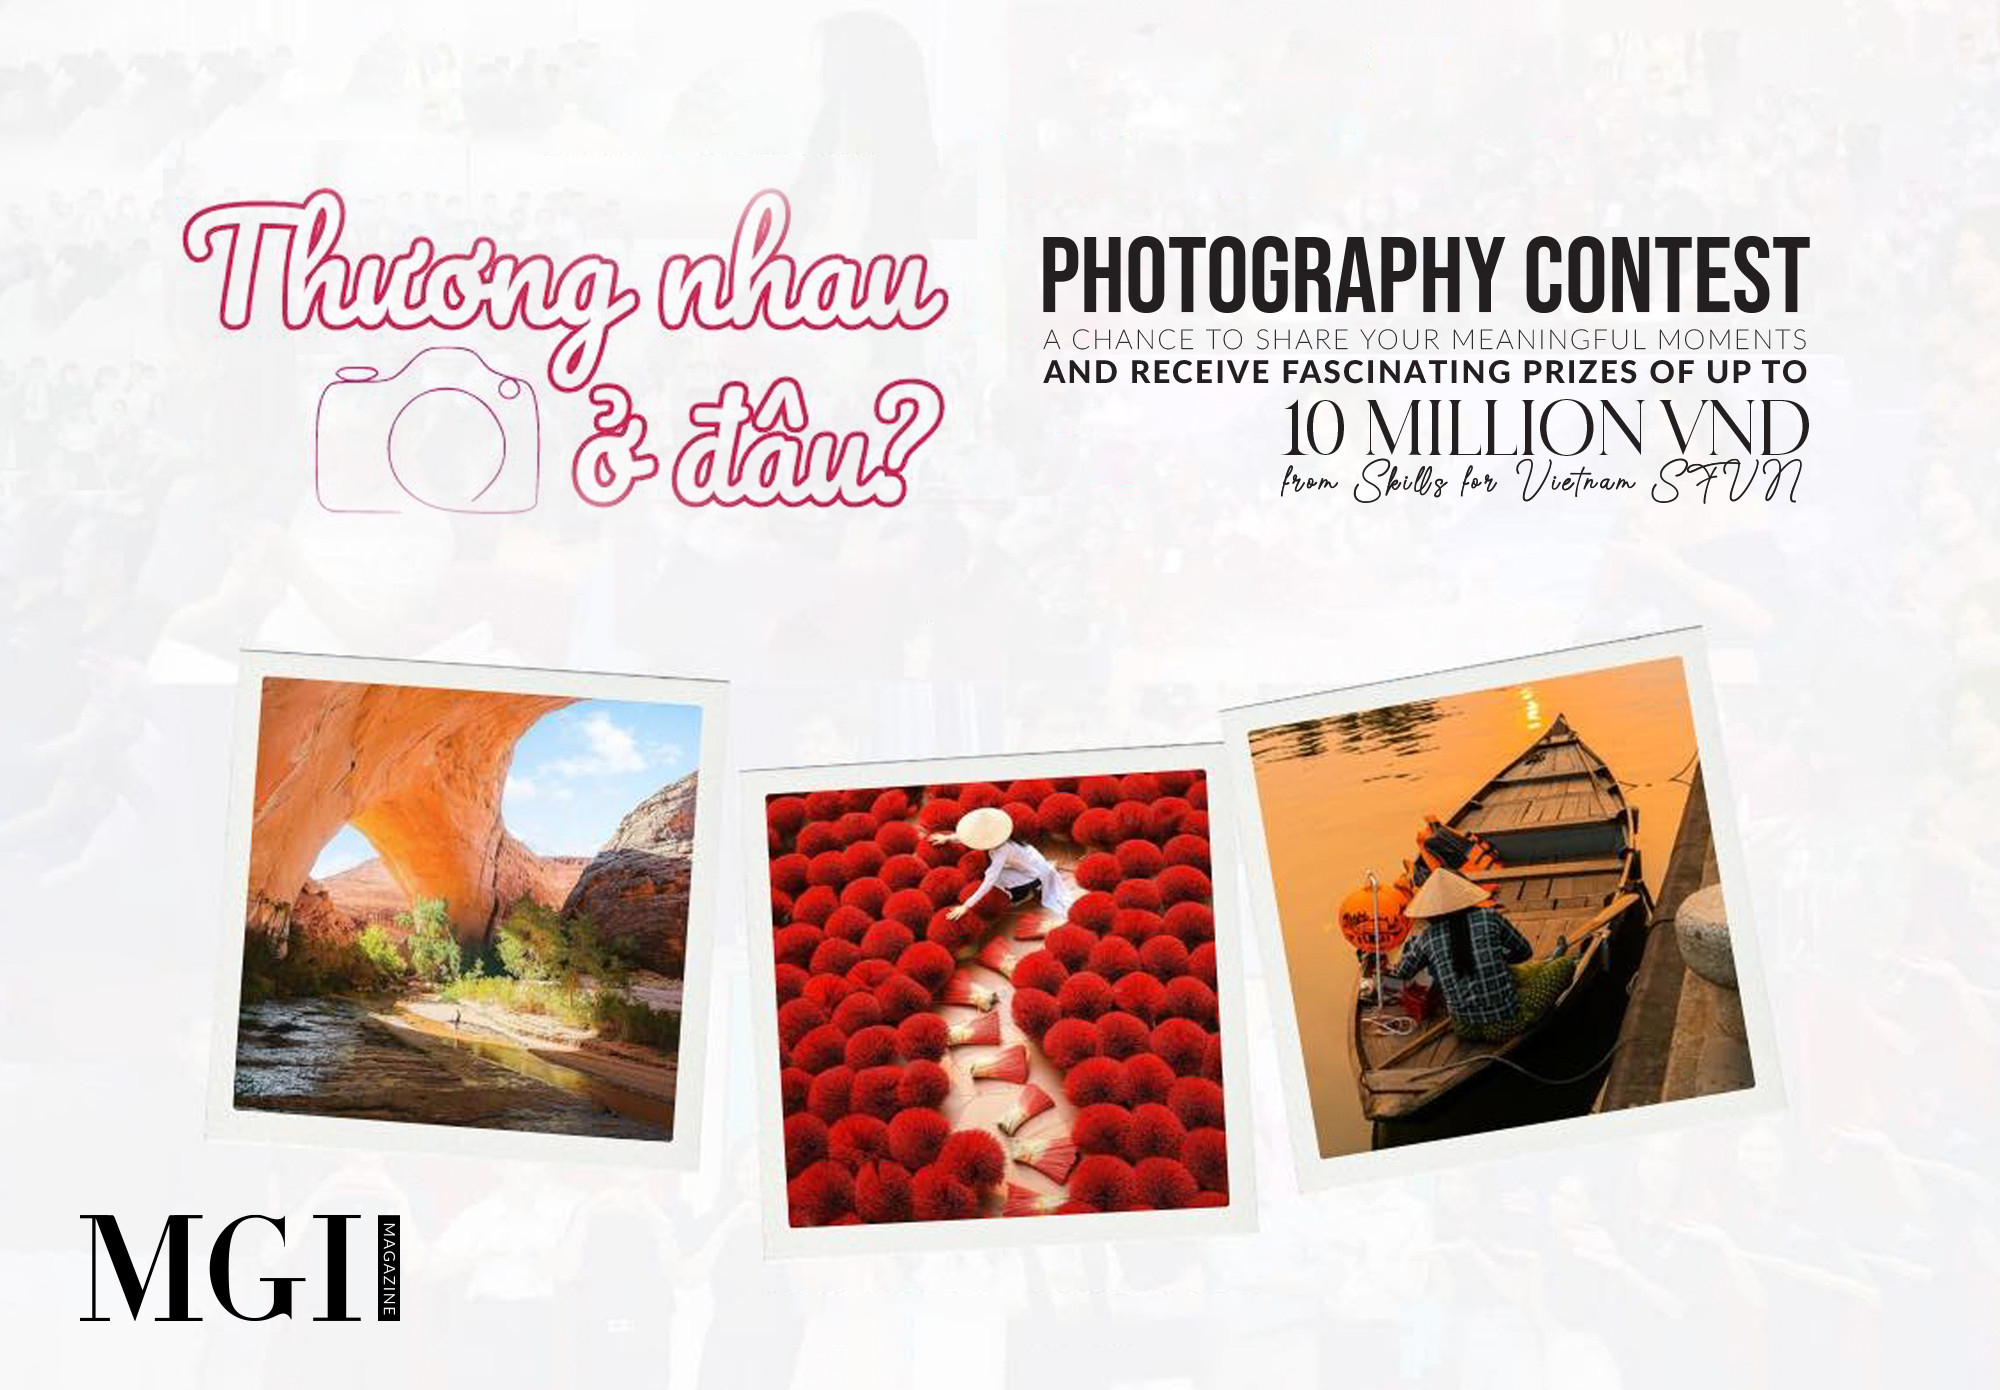 “Thuong Nhau O Dau” Photography Contest: A chance to share your meaningful moments and receive fascinating prizes of up to 10 million VND from Skills for Vietnam SFVN